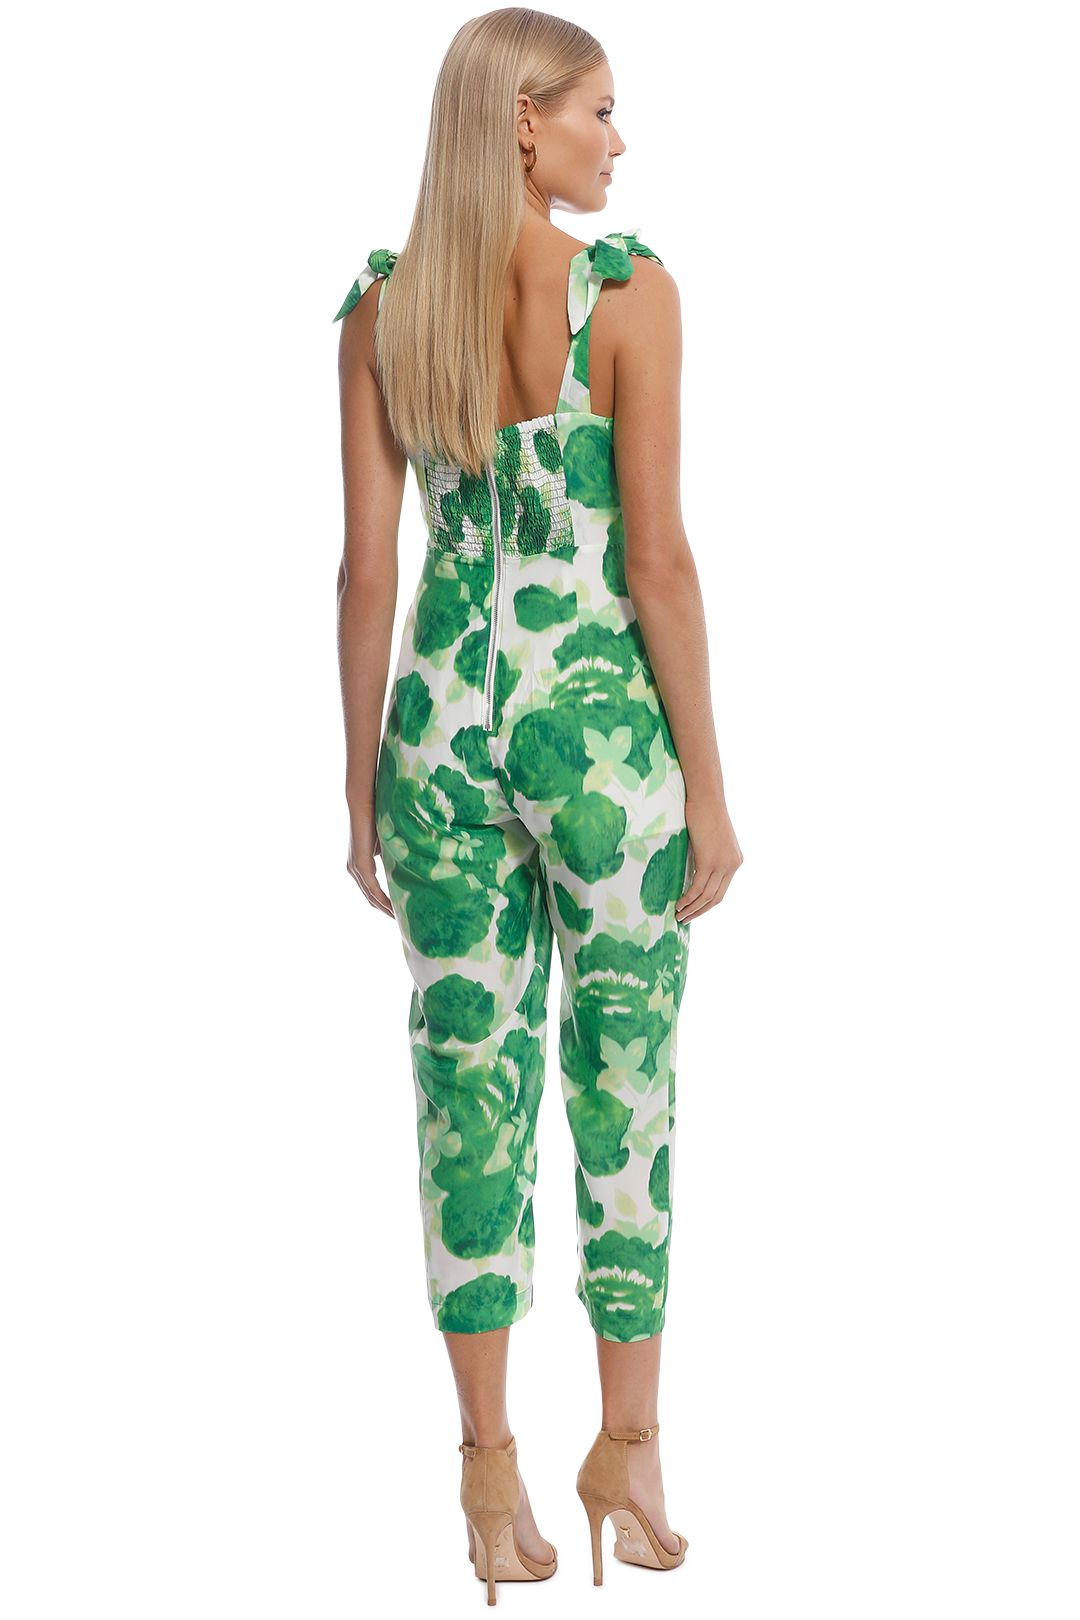 Alice McCall - Betty Baby Jumpsuit - Fern - Back